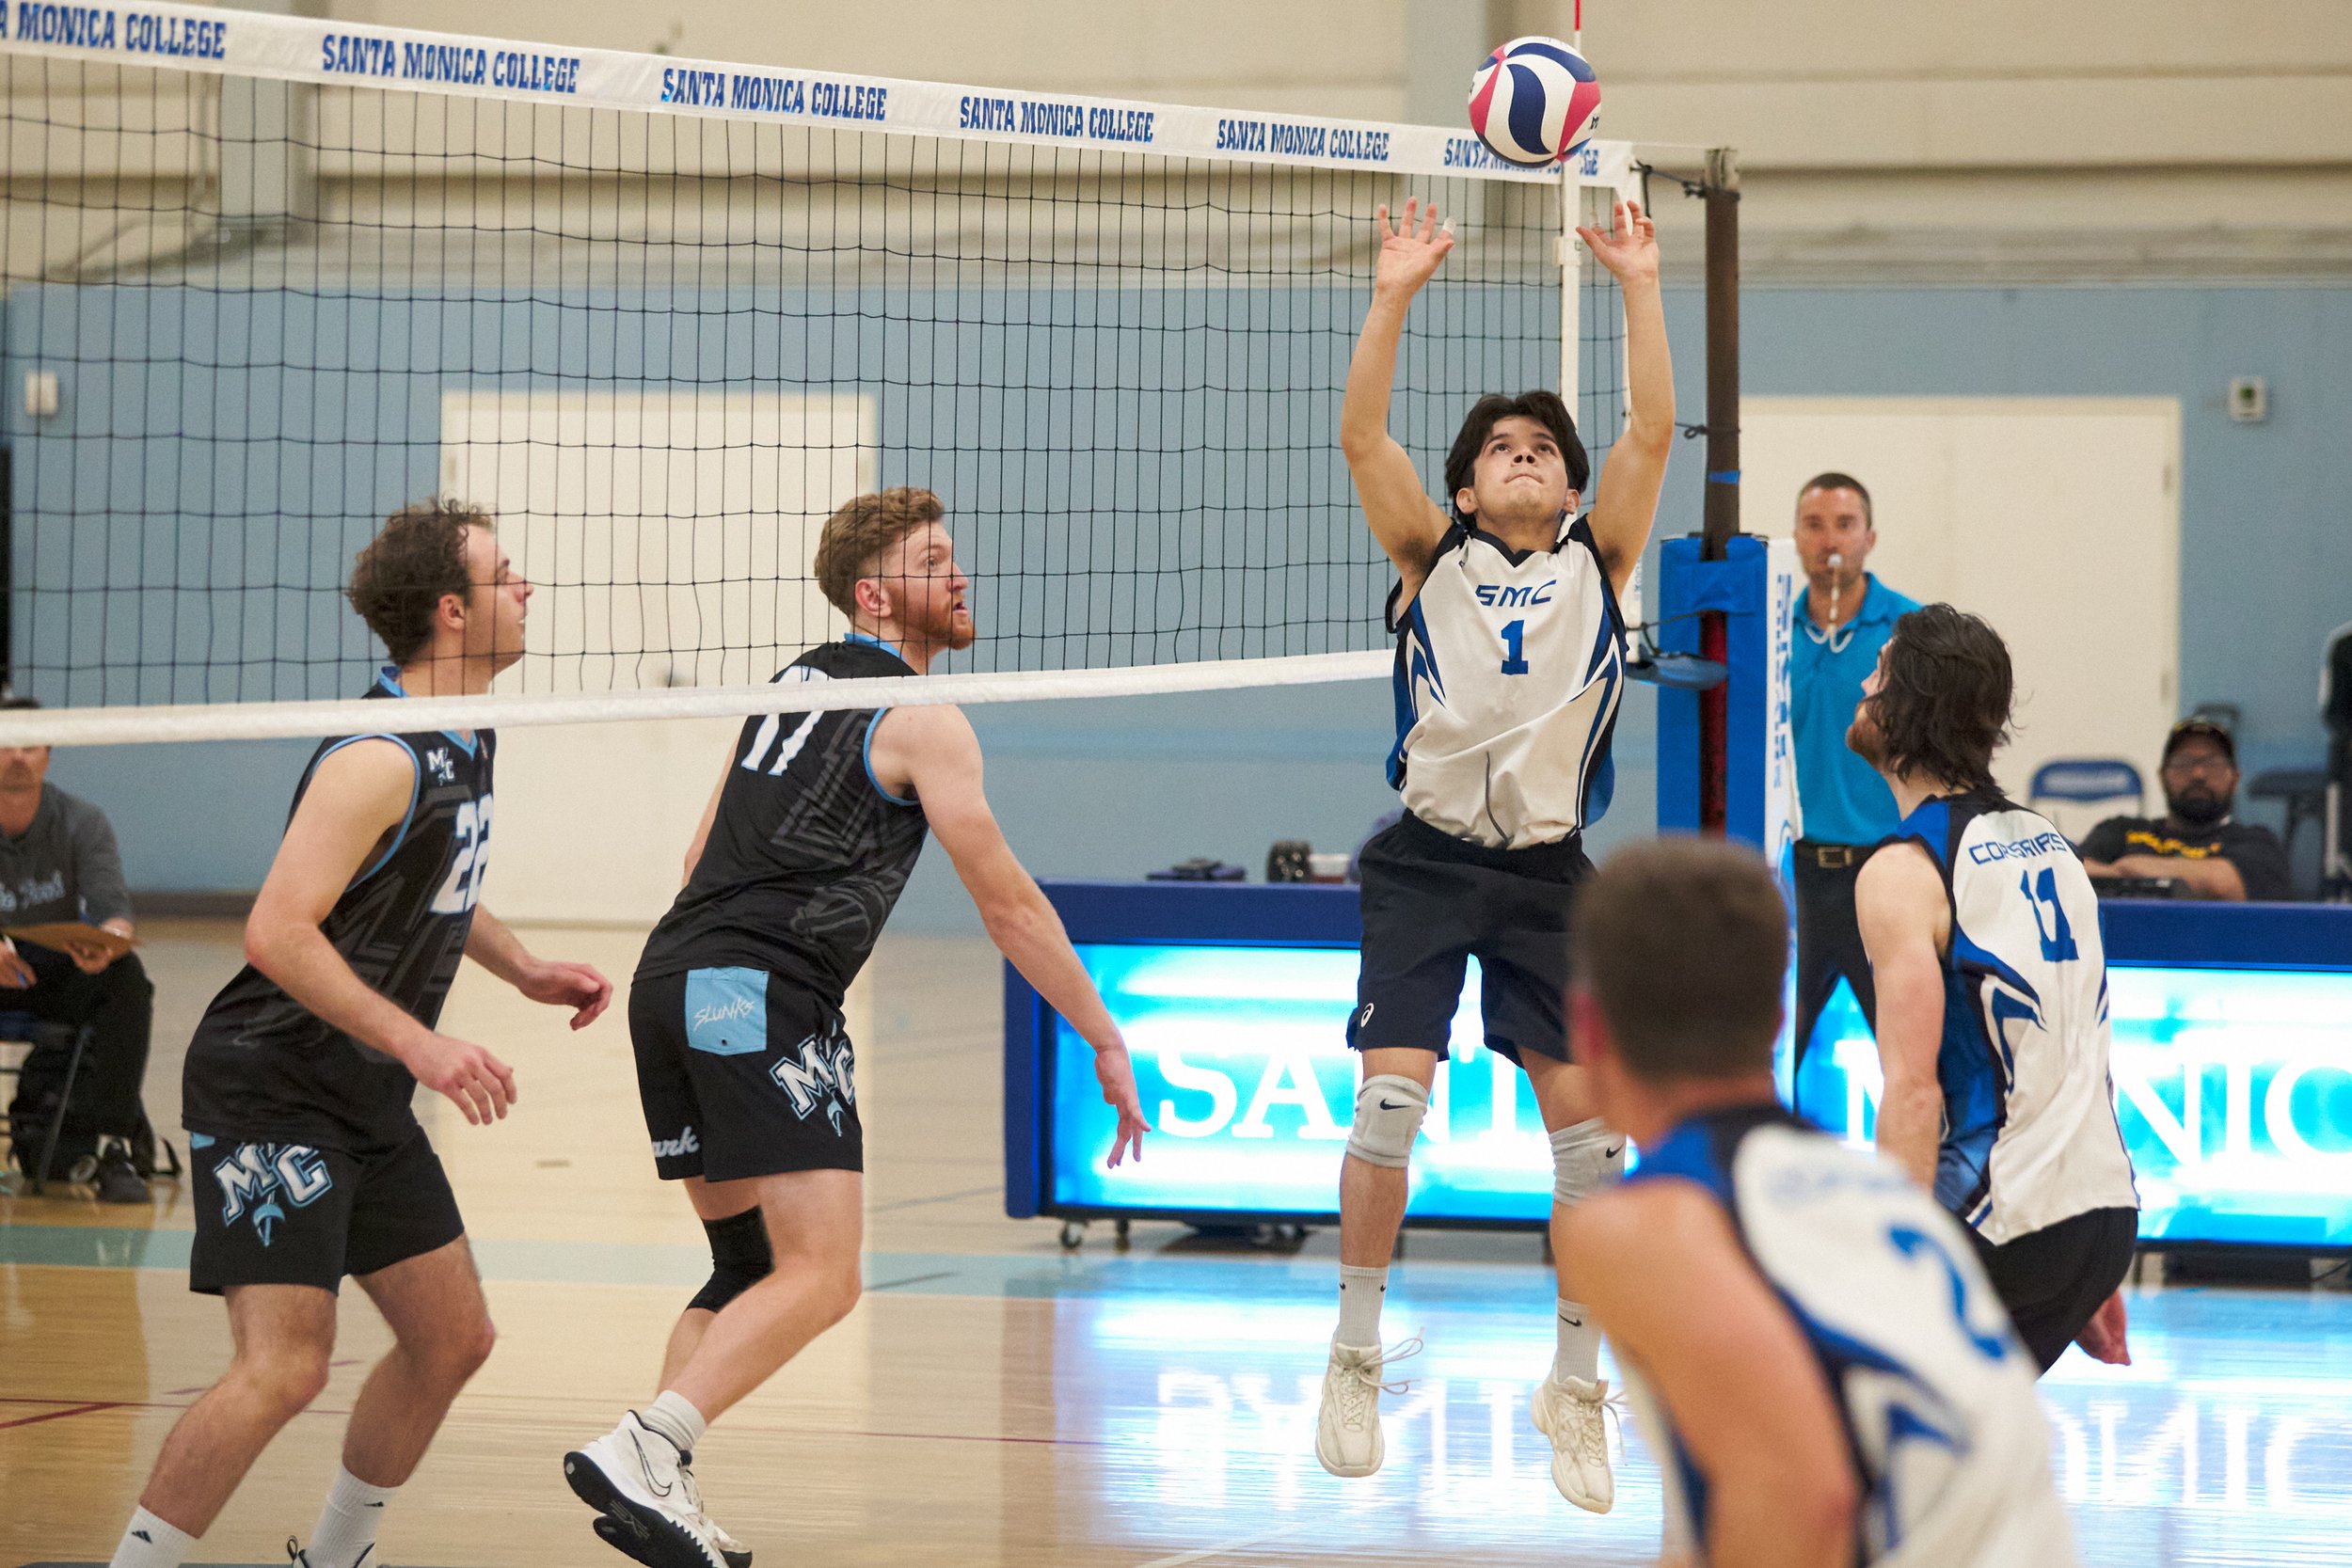  Santa Monica College Corsairs' Javier Barrientos (center) sets the ball during the men's volleyball match against the Moorpark College Raiders on Wednesday, April 12, 2023, at Corsair Gym in Santa Monica, Calif. The Corsairs lost 3-0. (Nicholas McCa